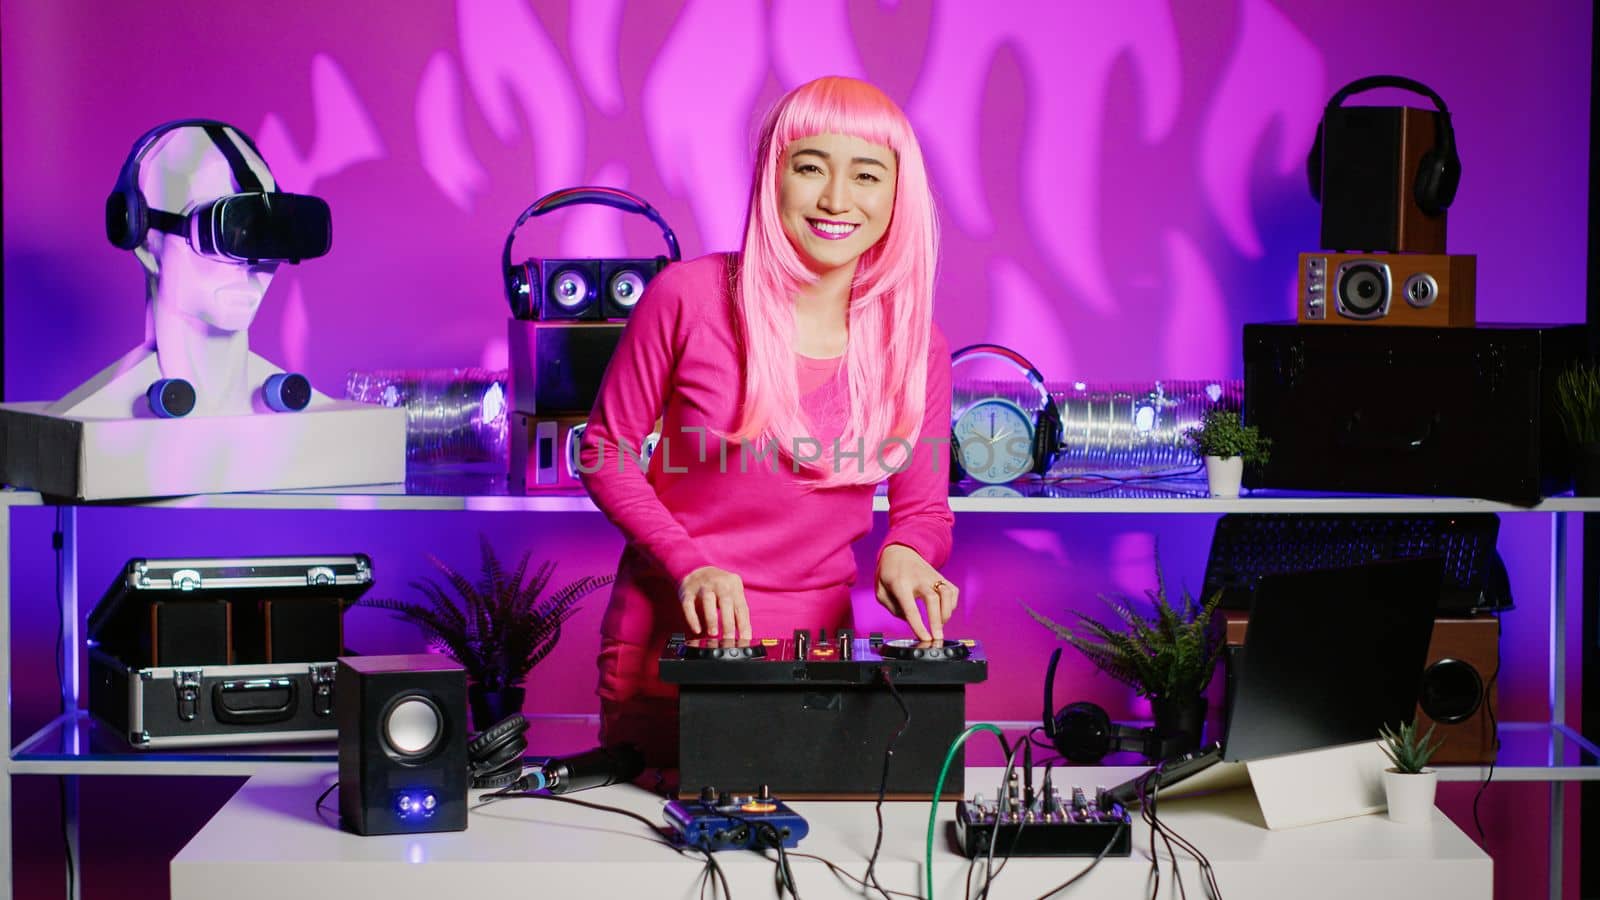 Asian musician standing at dj table mixing electronic sound with techno creating new remix, having fun in club during night time. Smiling performer playing at professional mixer during evening party